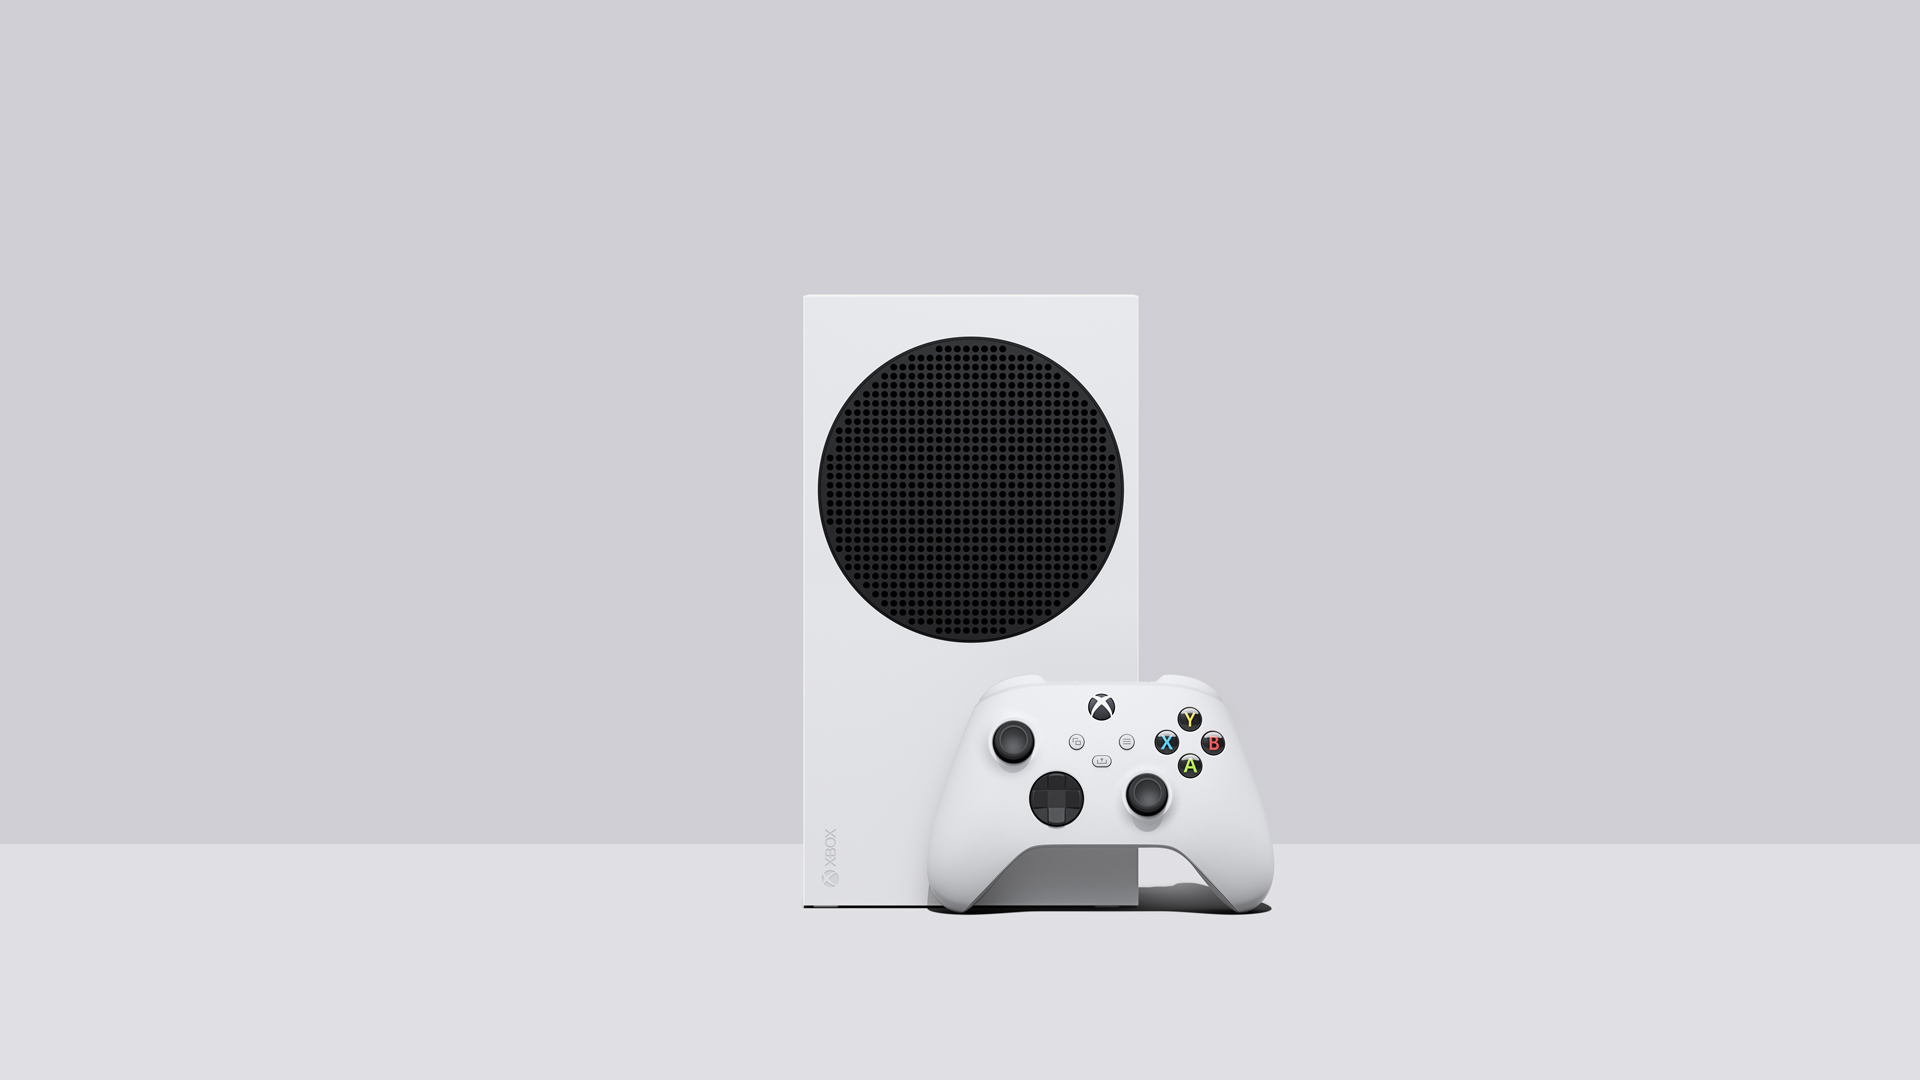 Introducing Xbox Series S, Delivering Next-Gen Performance in Our Smallest  Xbox Ever, Available November 10 at $299 - Xbox Wire